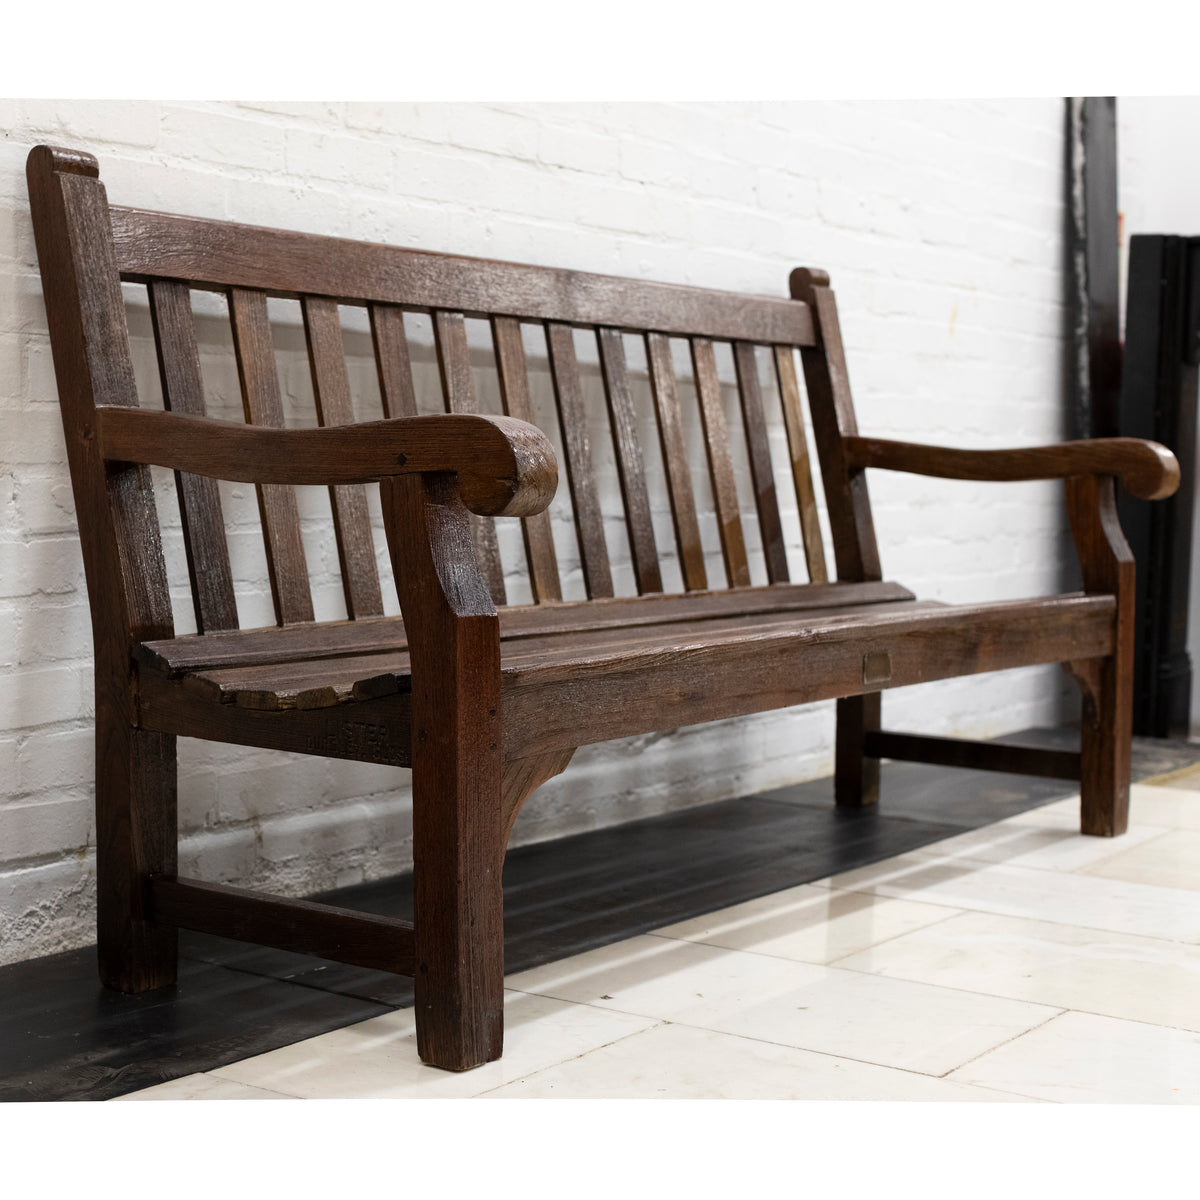 Reclaimed Lister Teak Bench | The Architectural Forum